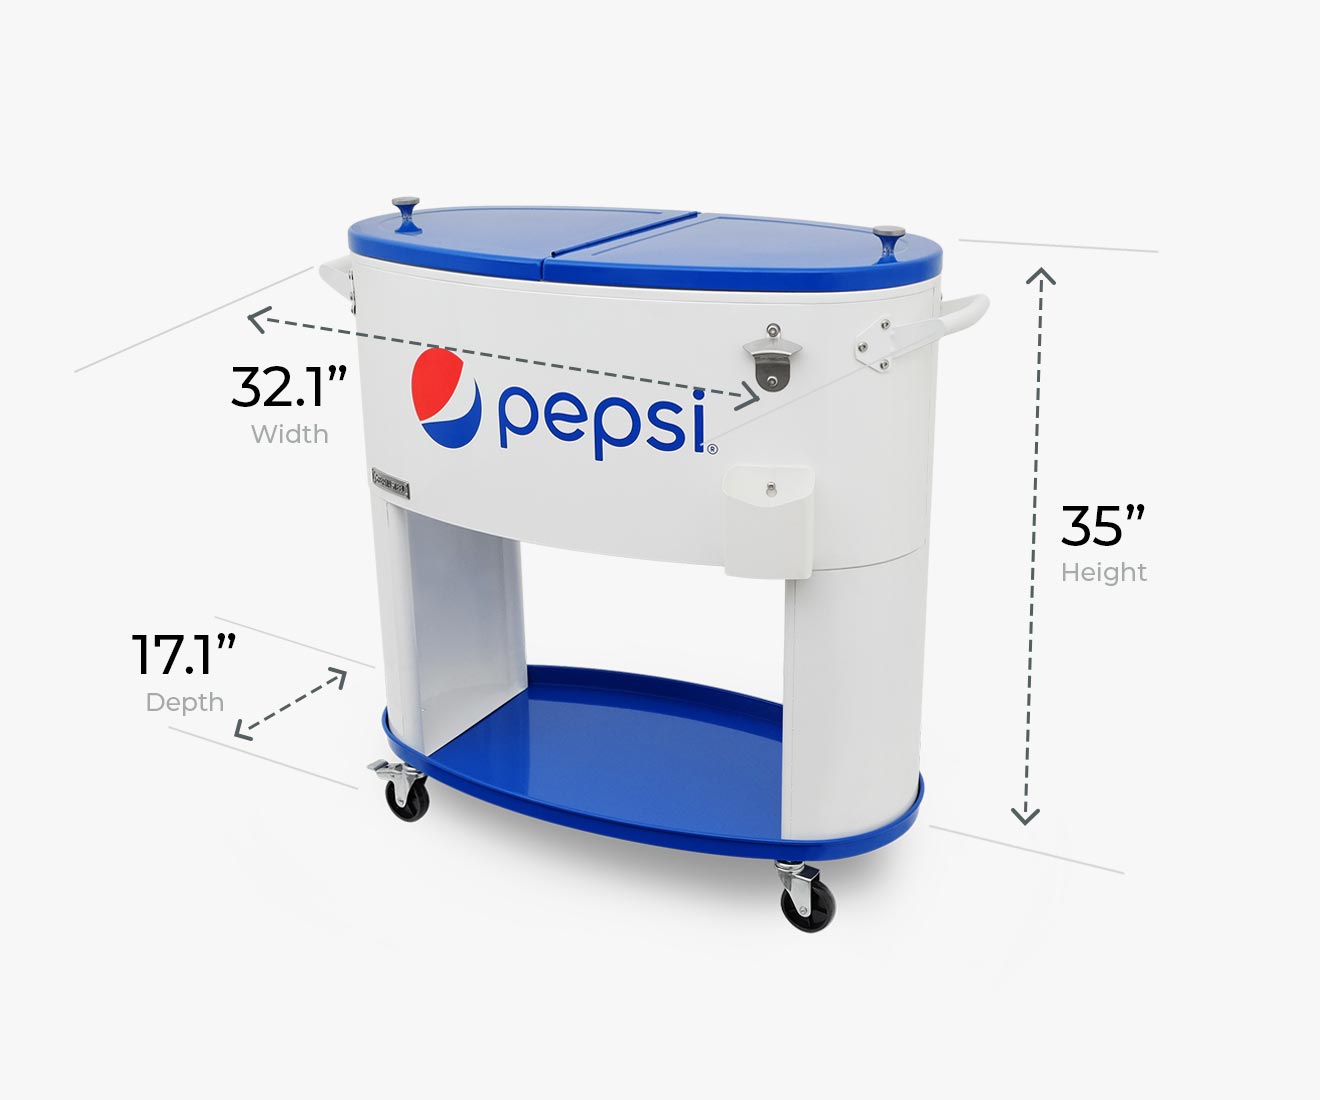 Pepsi Cooler 80 Quart Outdoor Patio Cooler Made by Permasteel Compact Dimensions